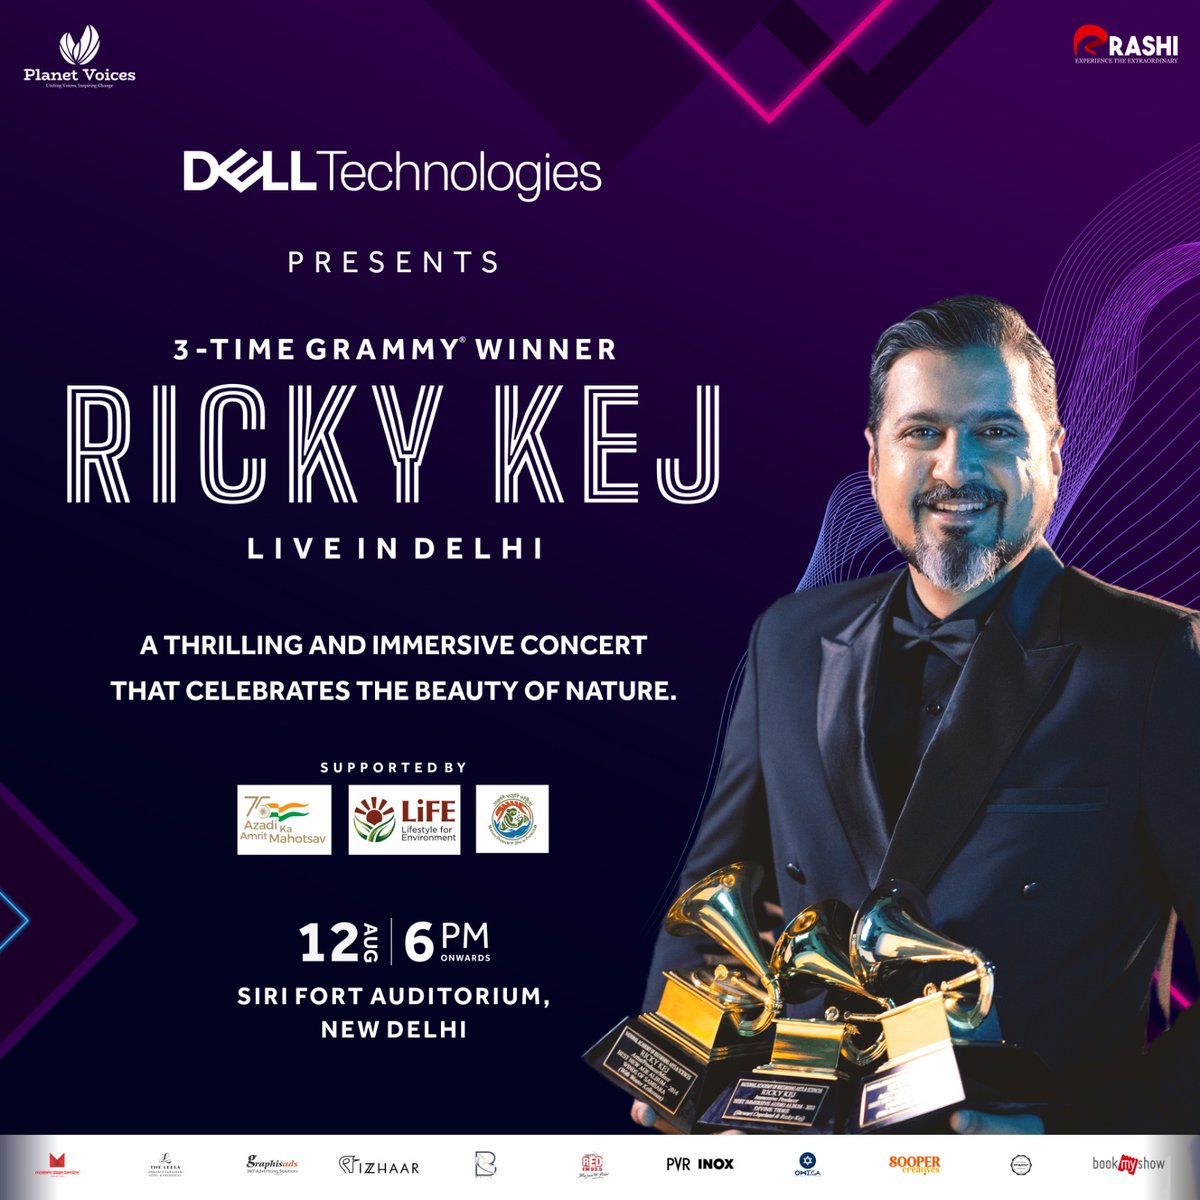 Rashi Entertainment is pleased to announce 'Planet Voices' first edition with the illustrious 3X Grammy® Award Winner “RICKY KEJ” with a thrilling and immersive concert that celebrates the beauty of nature on Saturday, on August 12th, 2023 at Siri Fort Auditorium in Delhi.